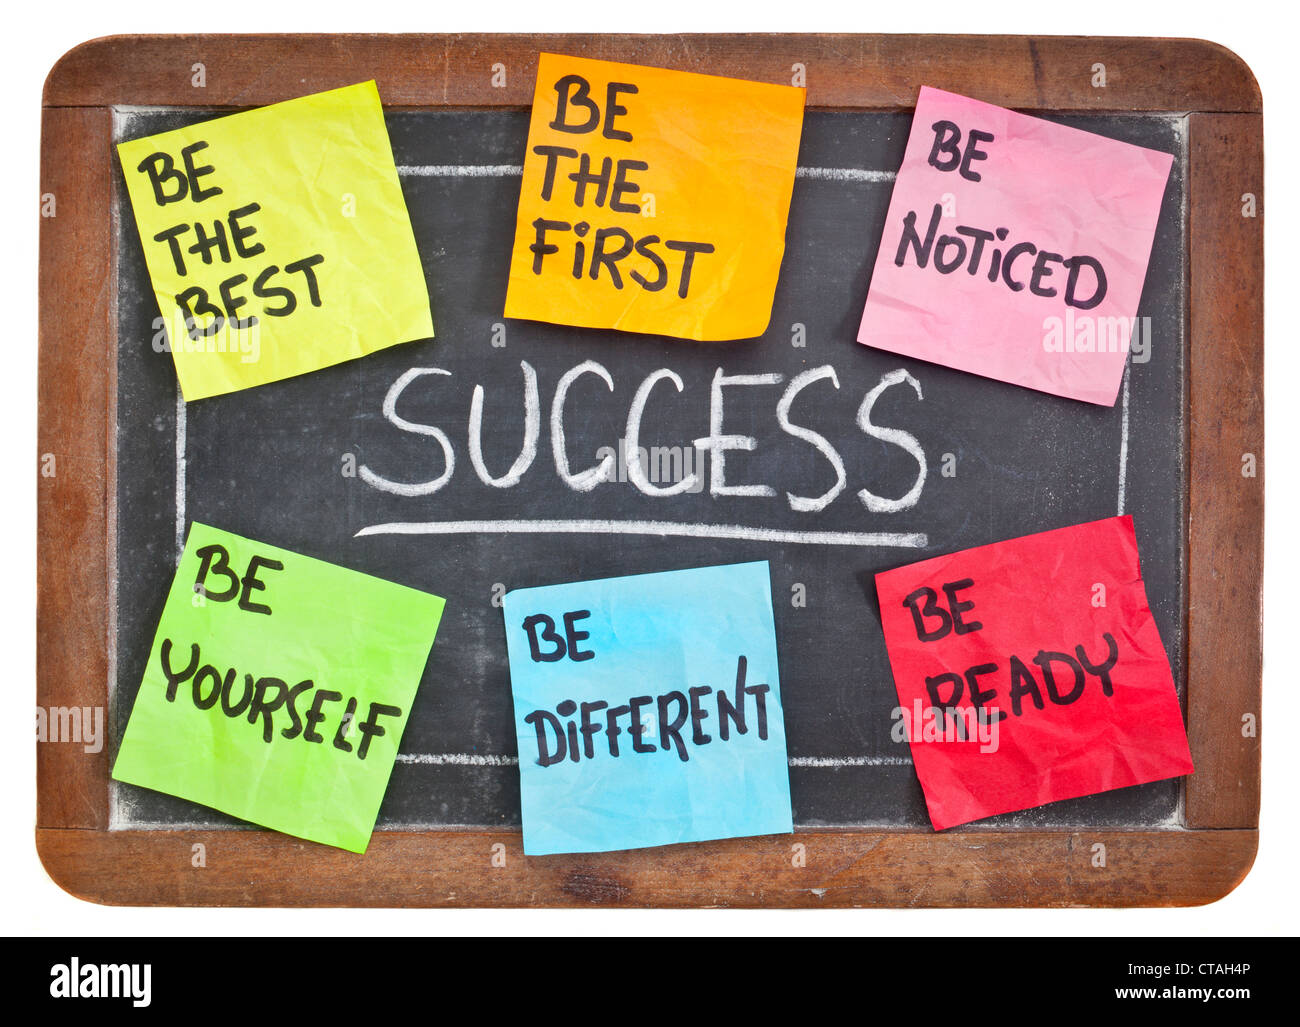 how to successful concept on a blackboard - be the first, the best, different, yourself, noticed, ready Stock Photo